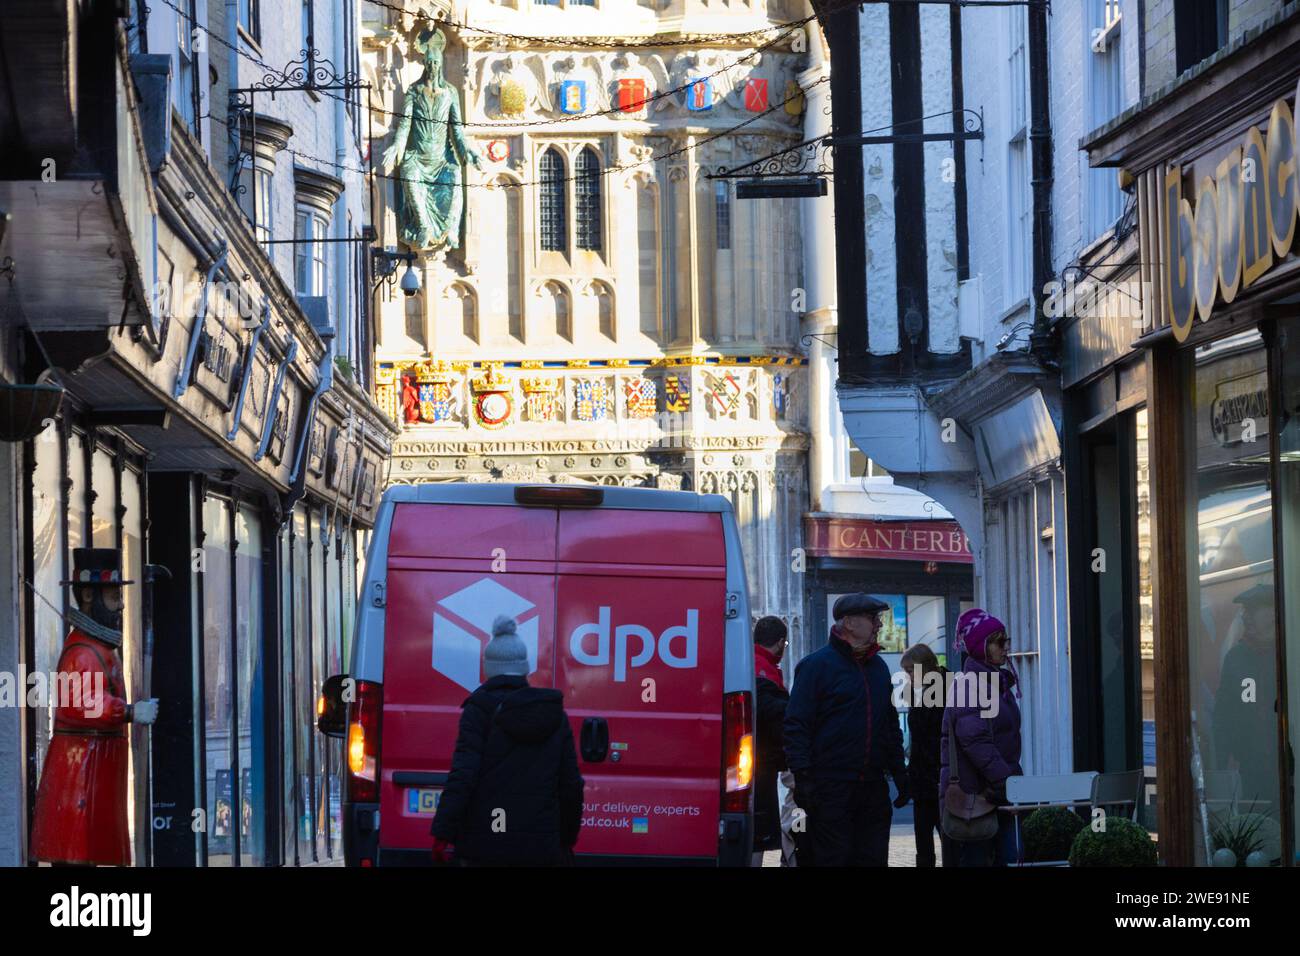 Dpd van in front of canturbury cathedral, canterbury, kent, uk Stock Photo